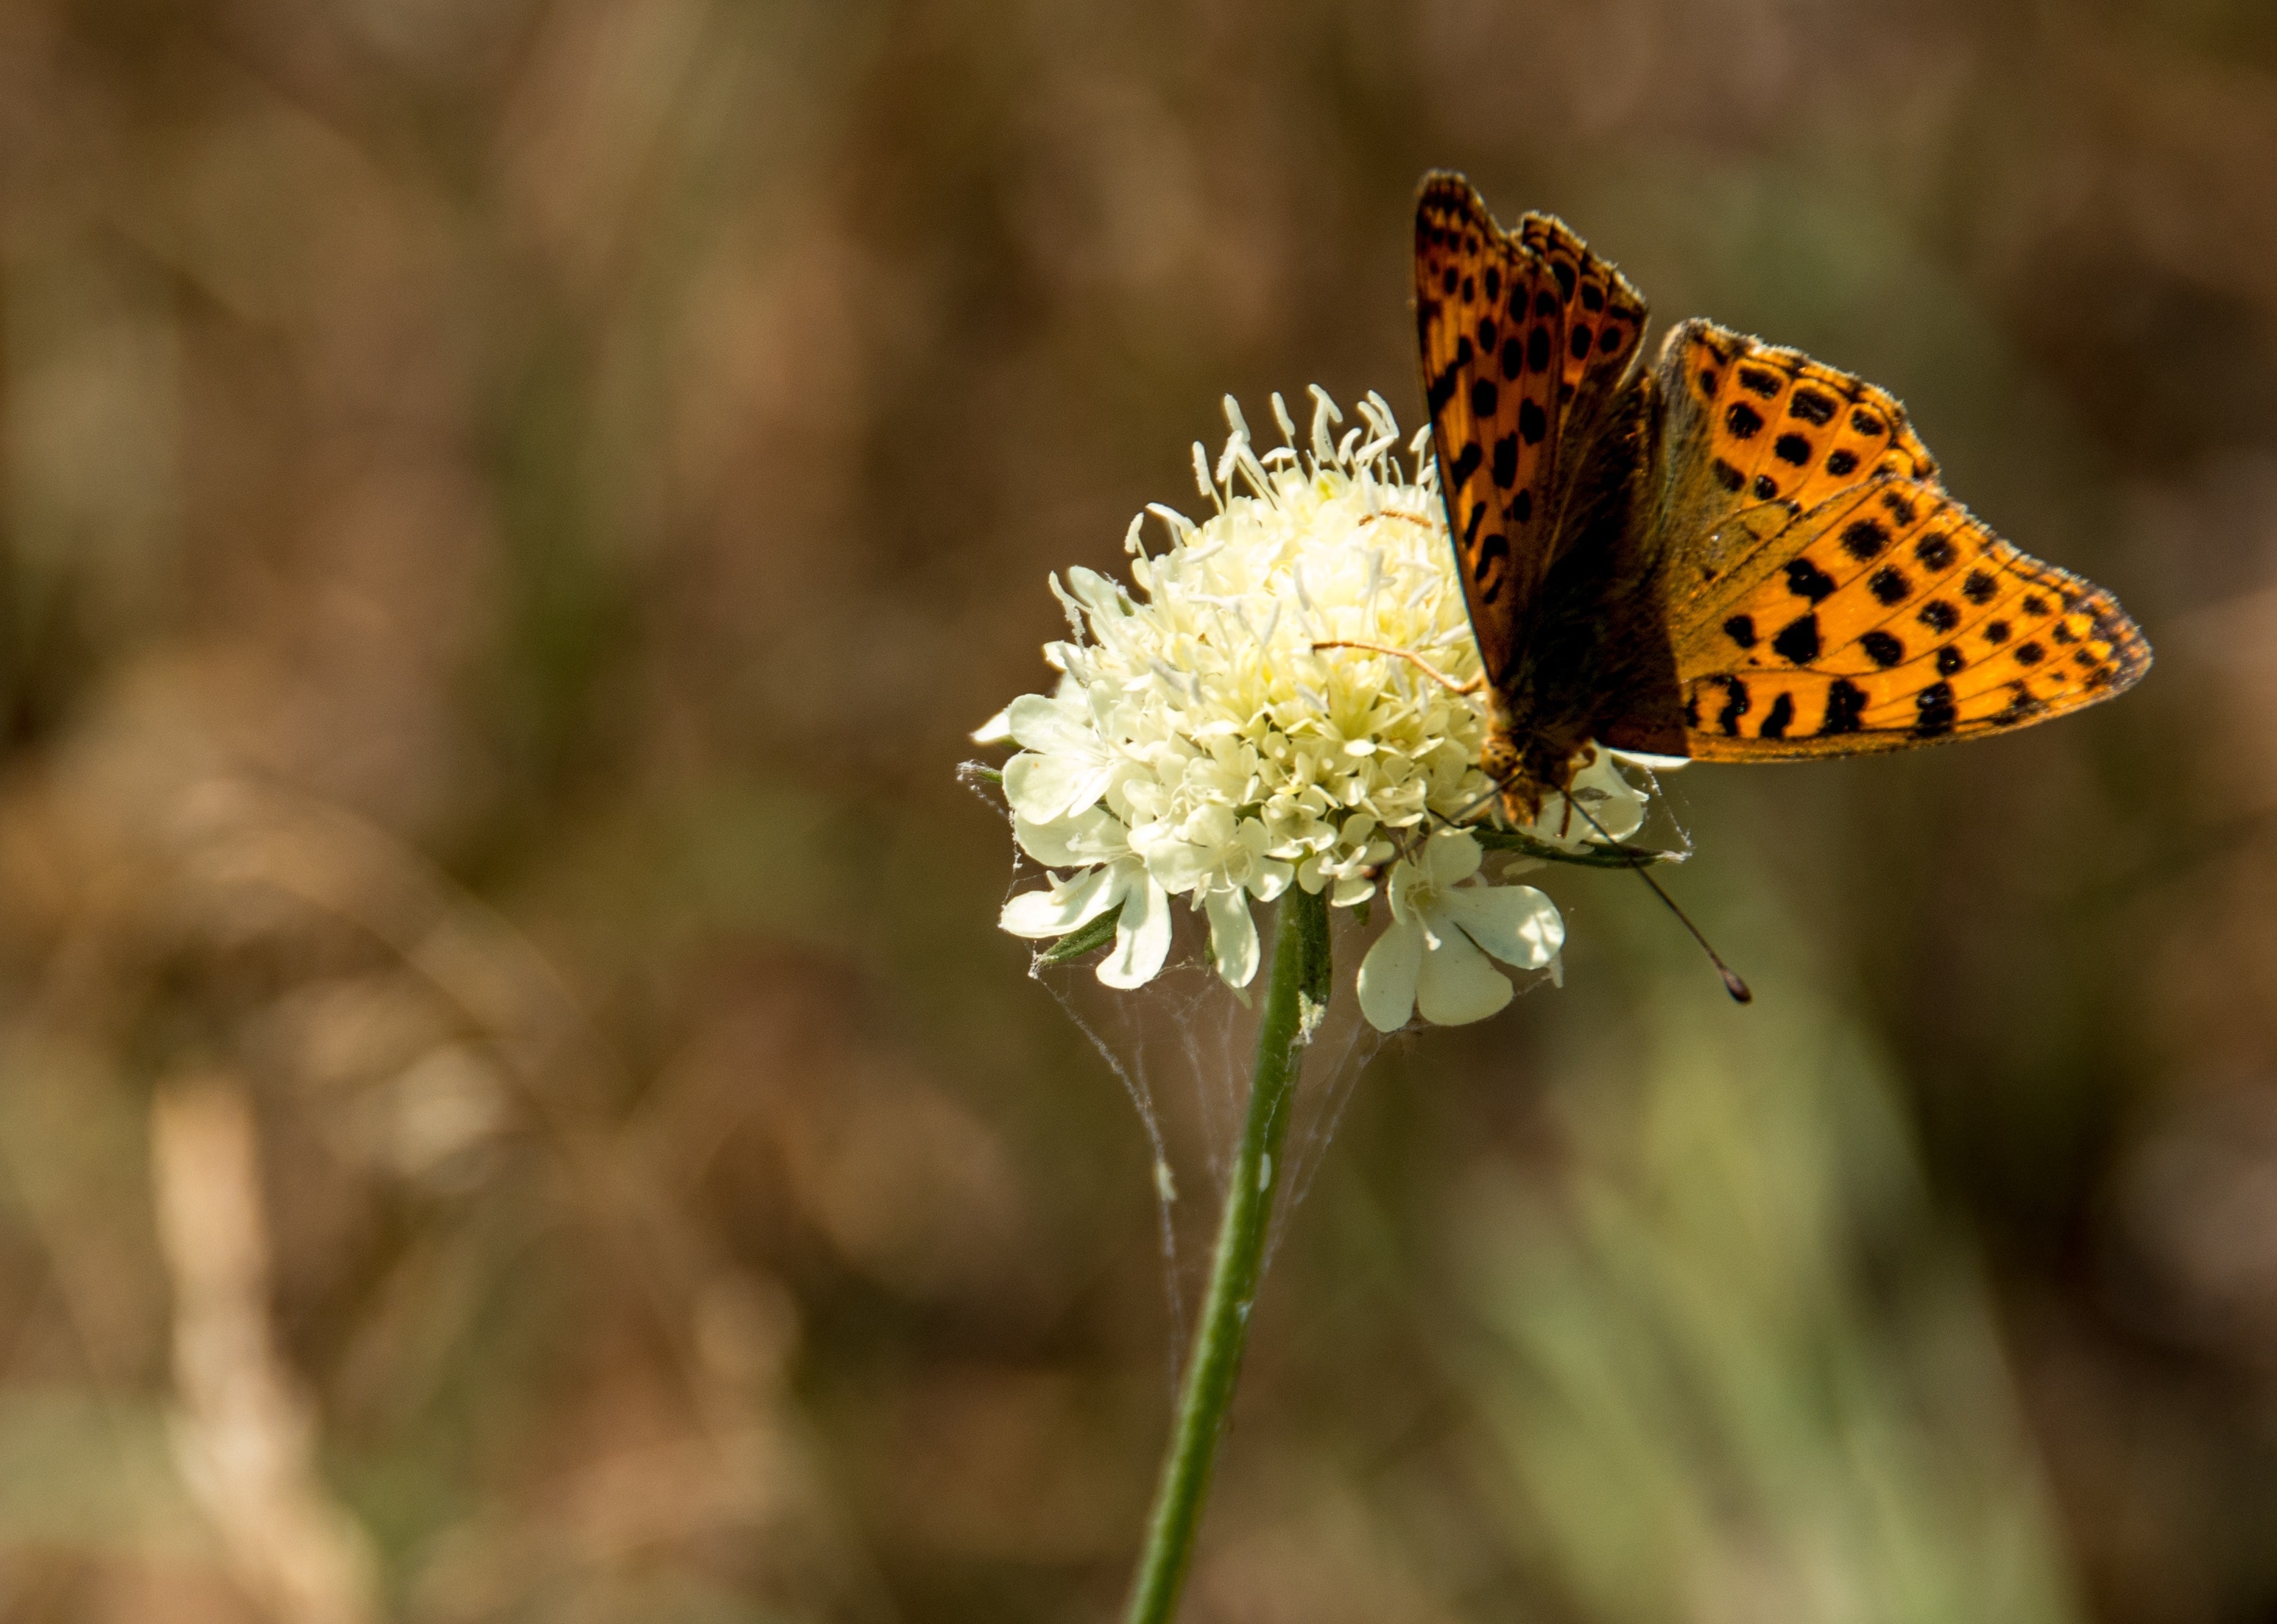 Butterfly, Animal, Insect, Nature, flower, nature